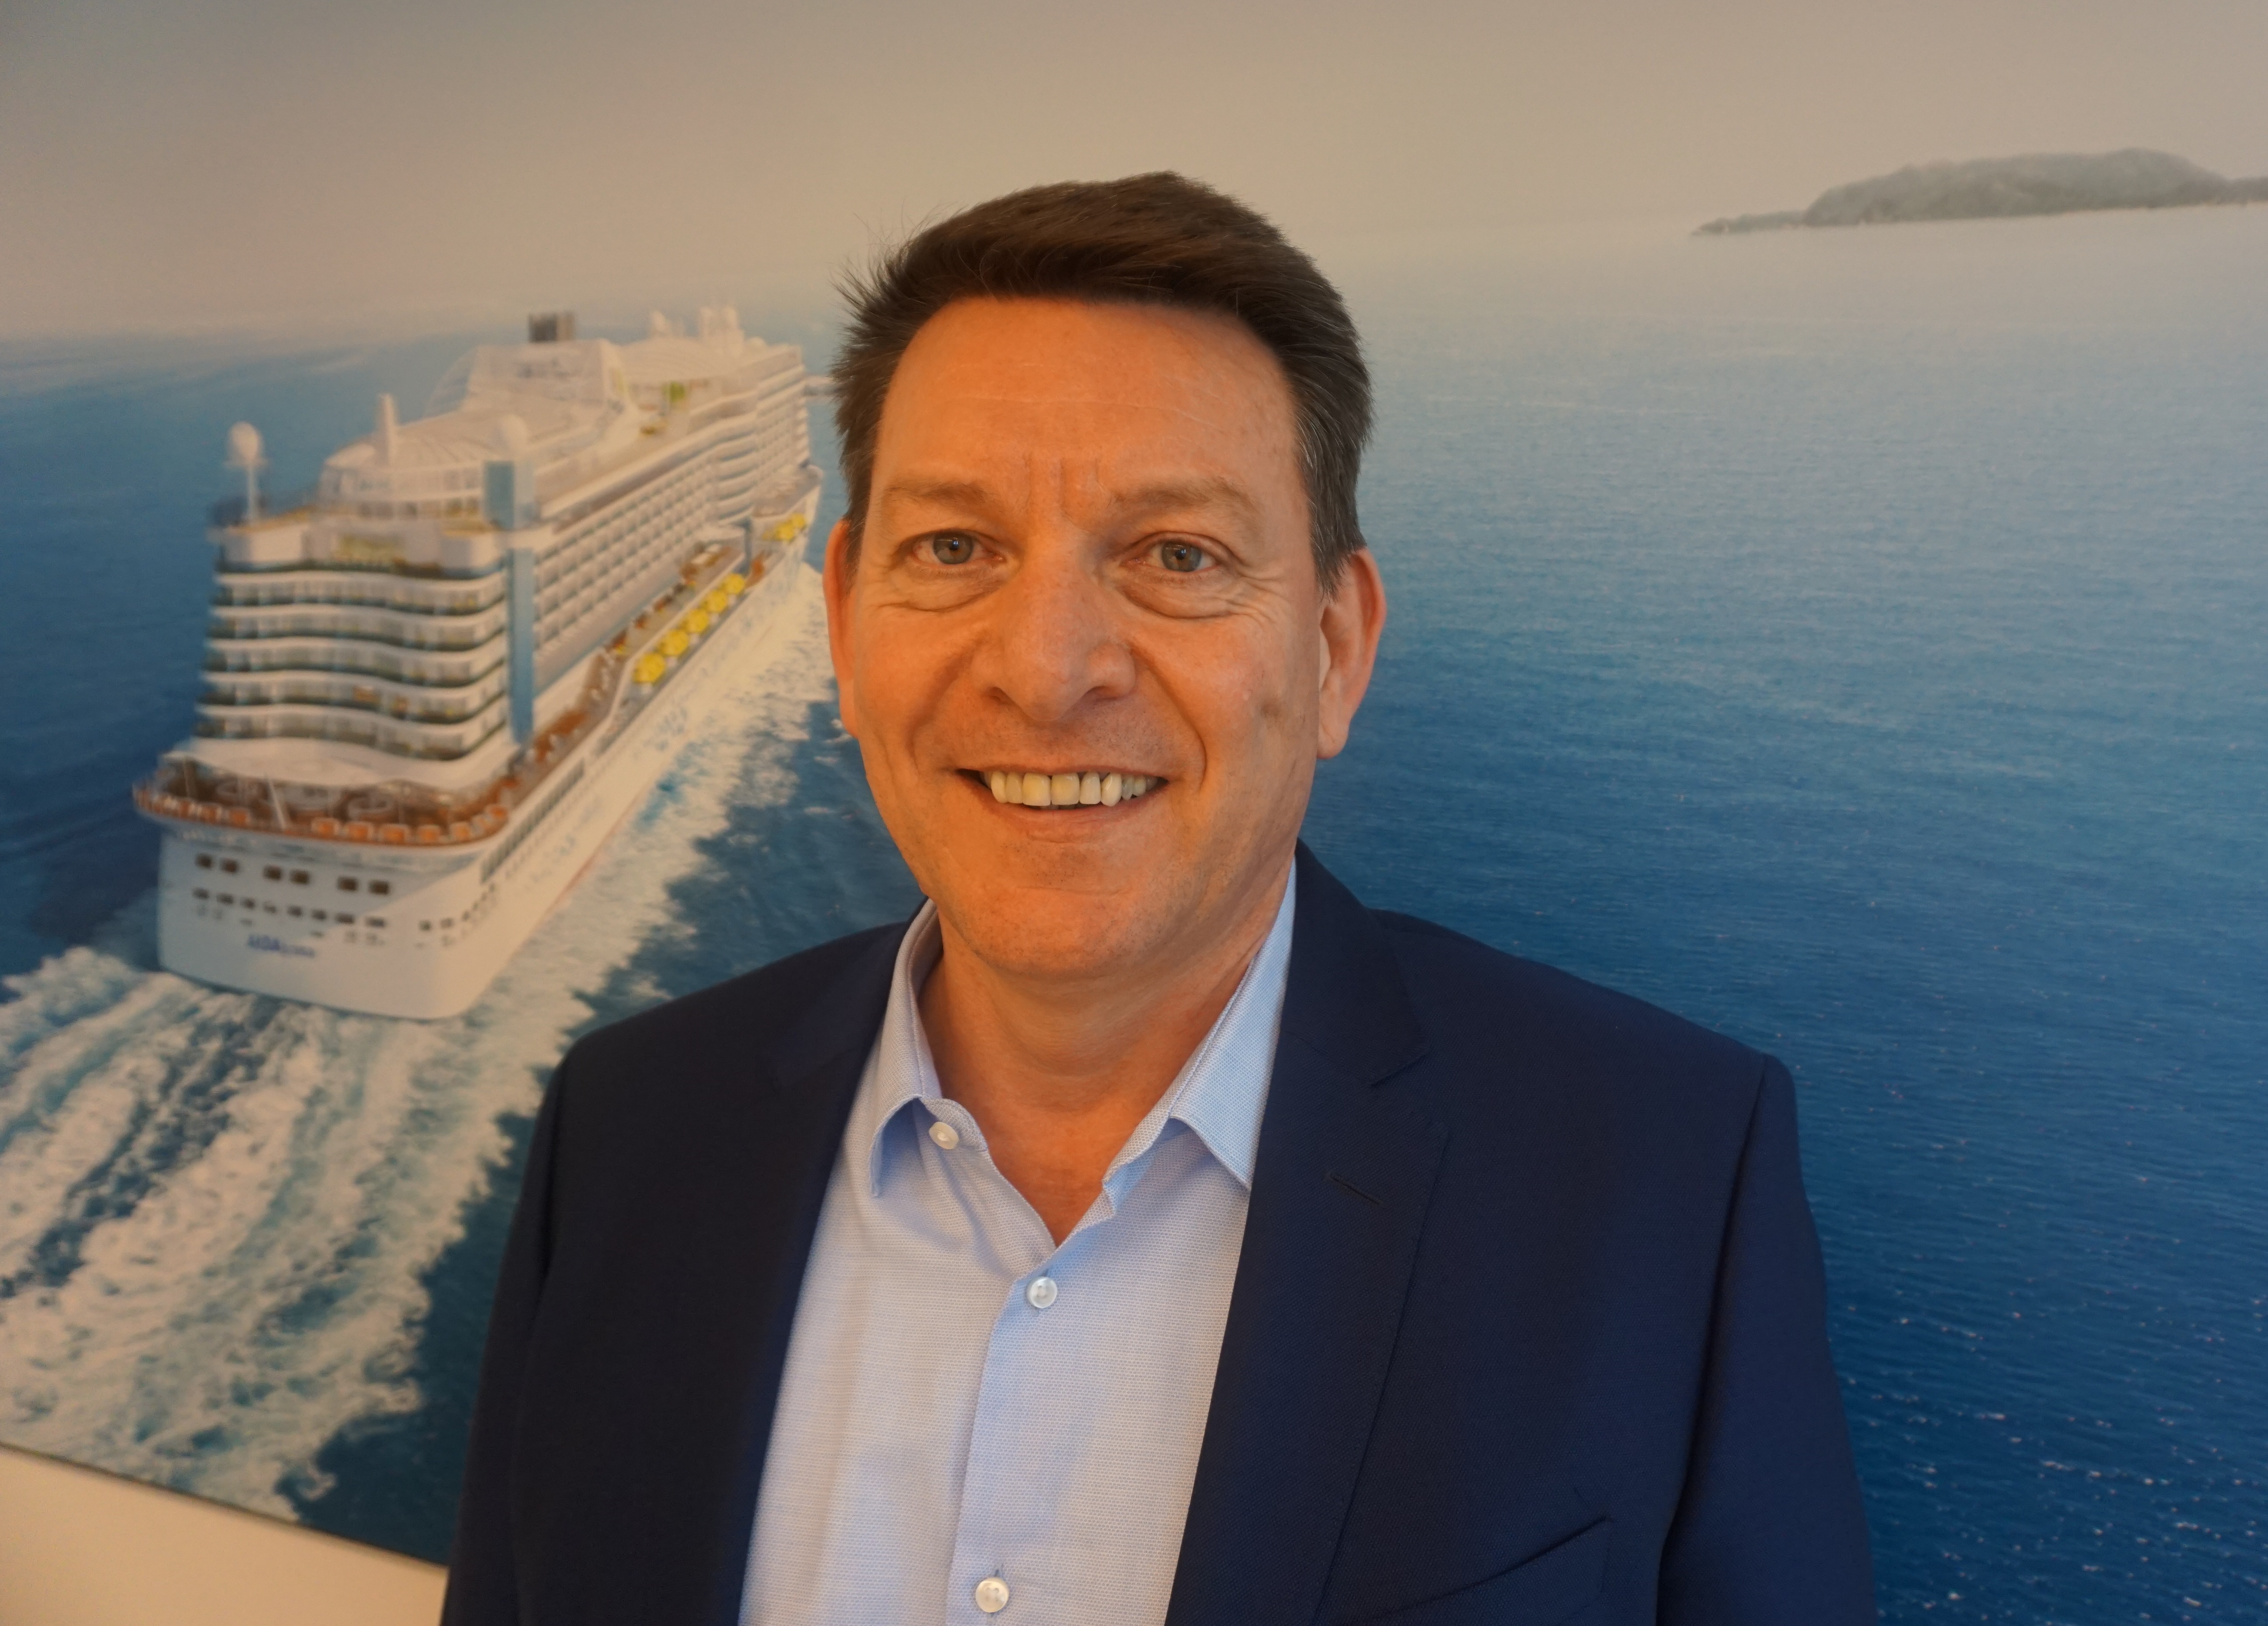 Change of Management, Keith Dowds becomes the New Managing Director at Carnival Maritime